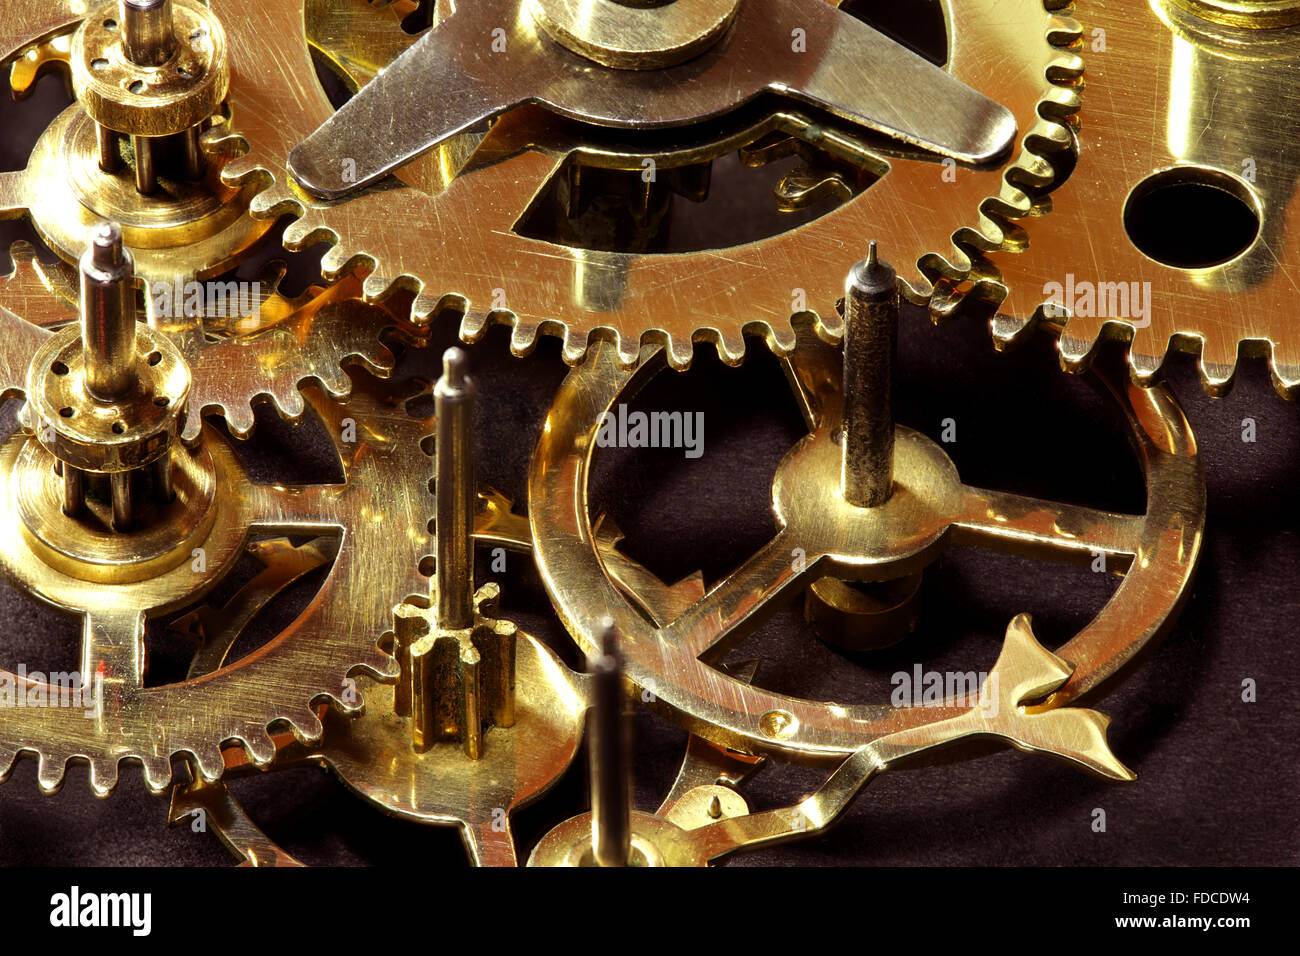 Closeup of gears from old clock works. Stock Photo